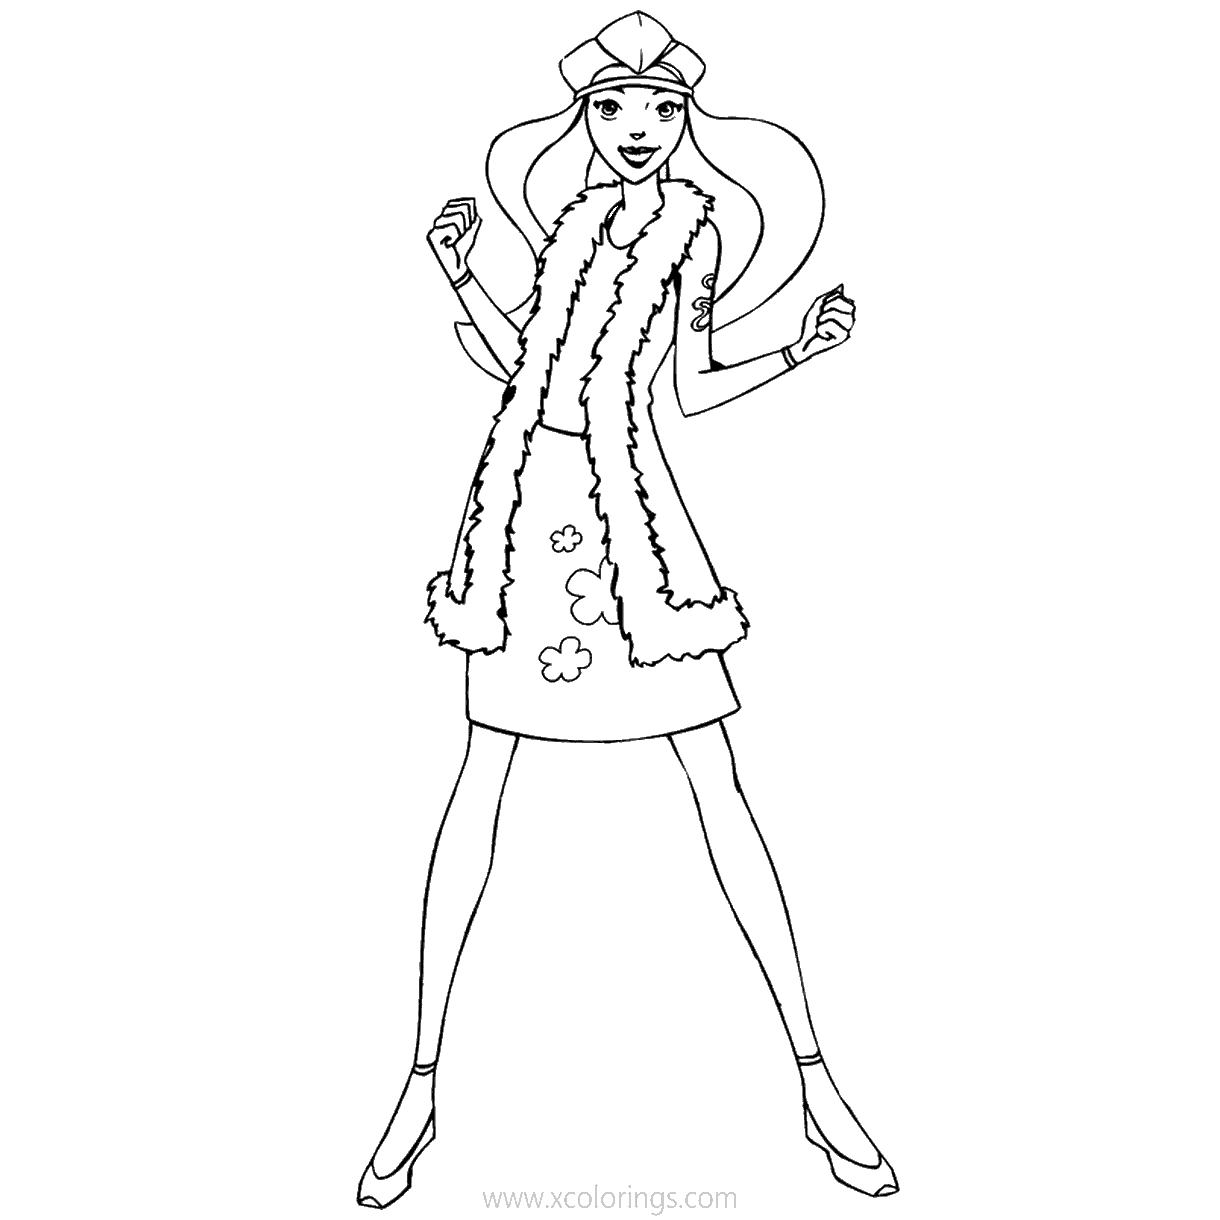 Free Totally Spies Coloring Pages Samantha with Coat printable